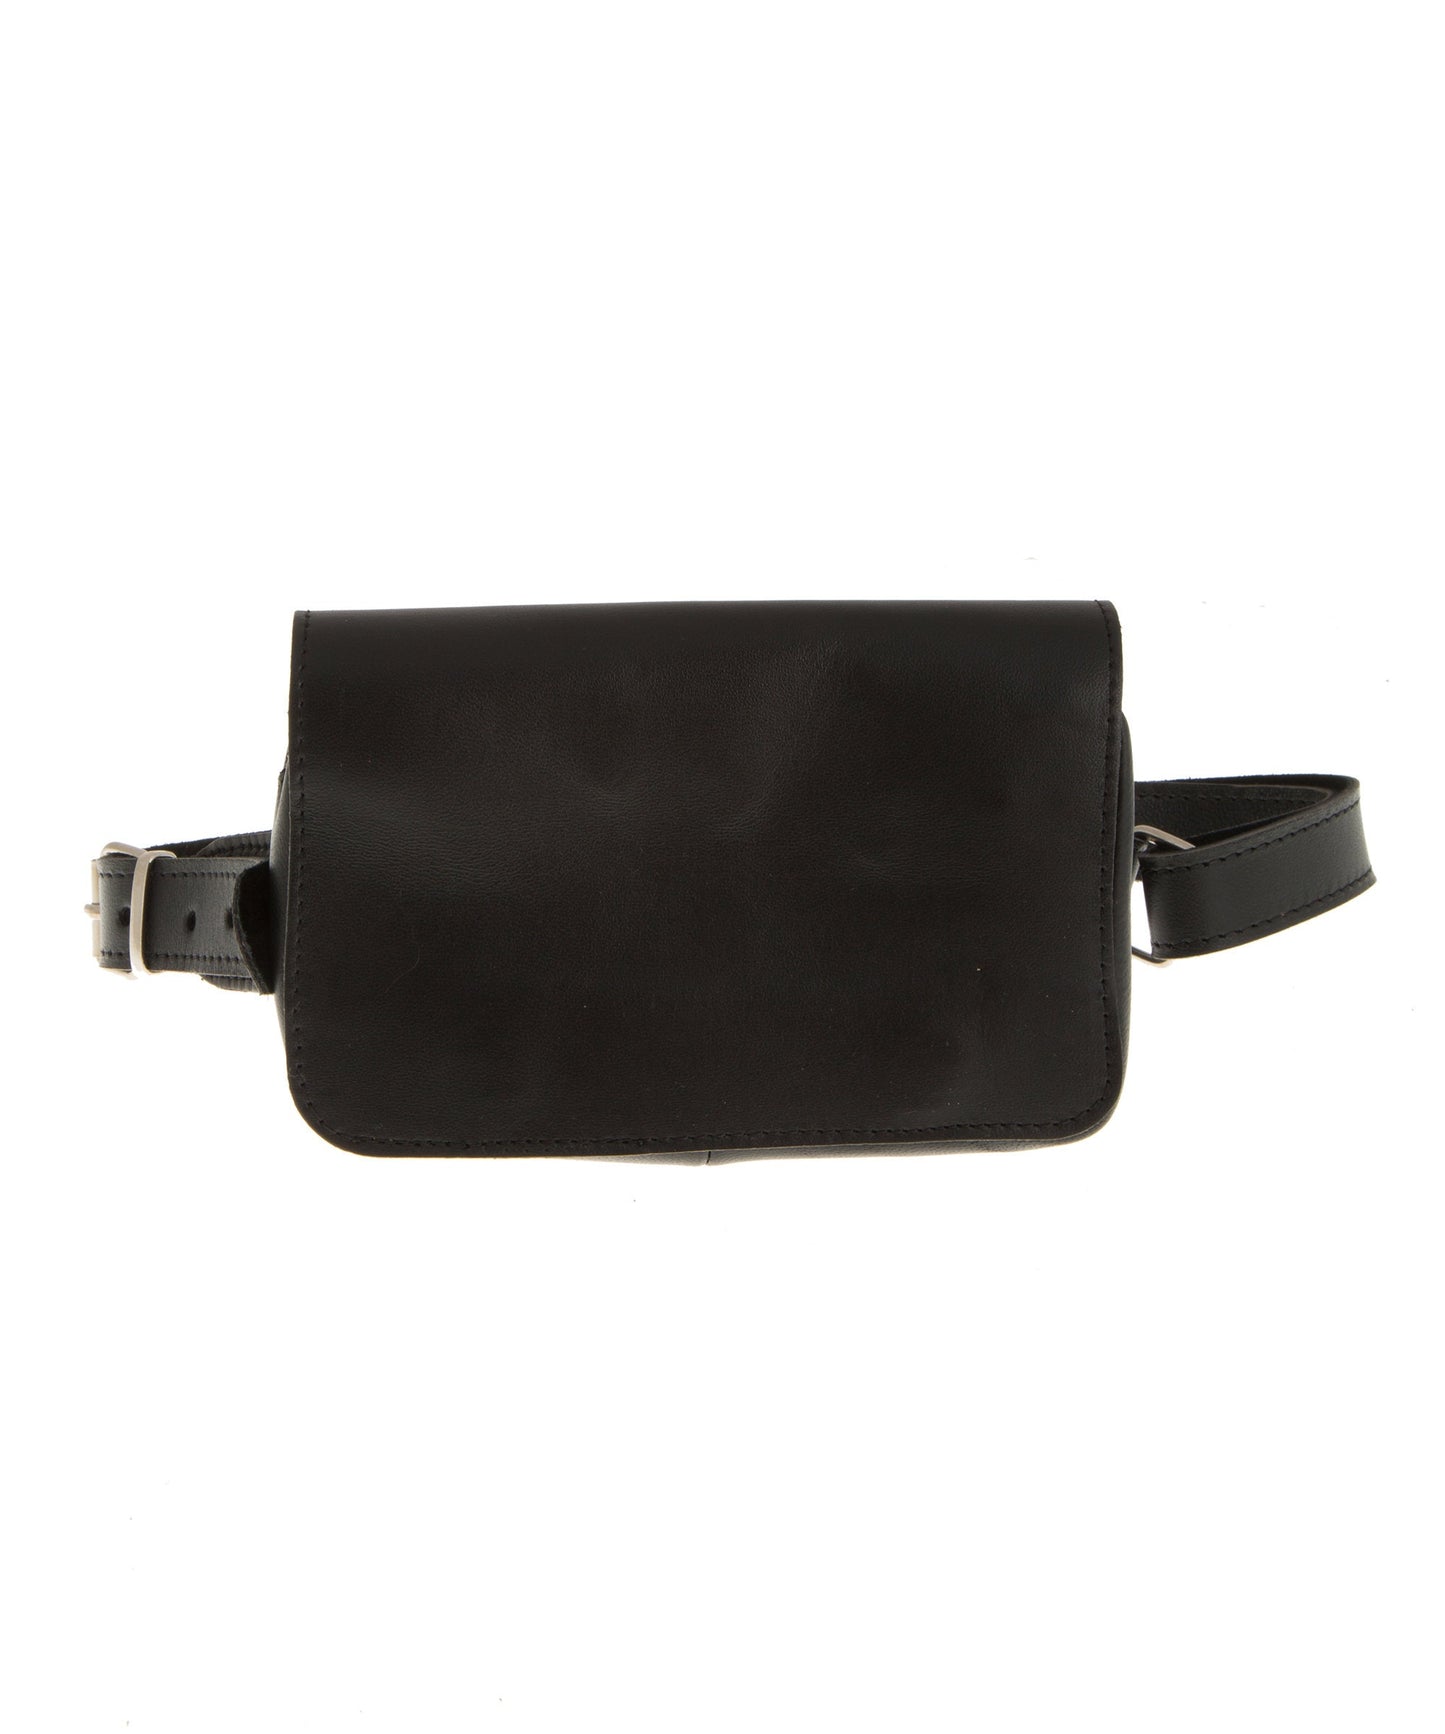 Leather Fanny Pack for Woman, Leather Belt Bags, Bum Bag, Hip Bag, Women's Leather Accessories